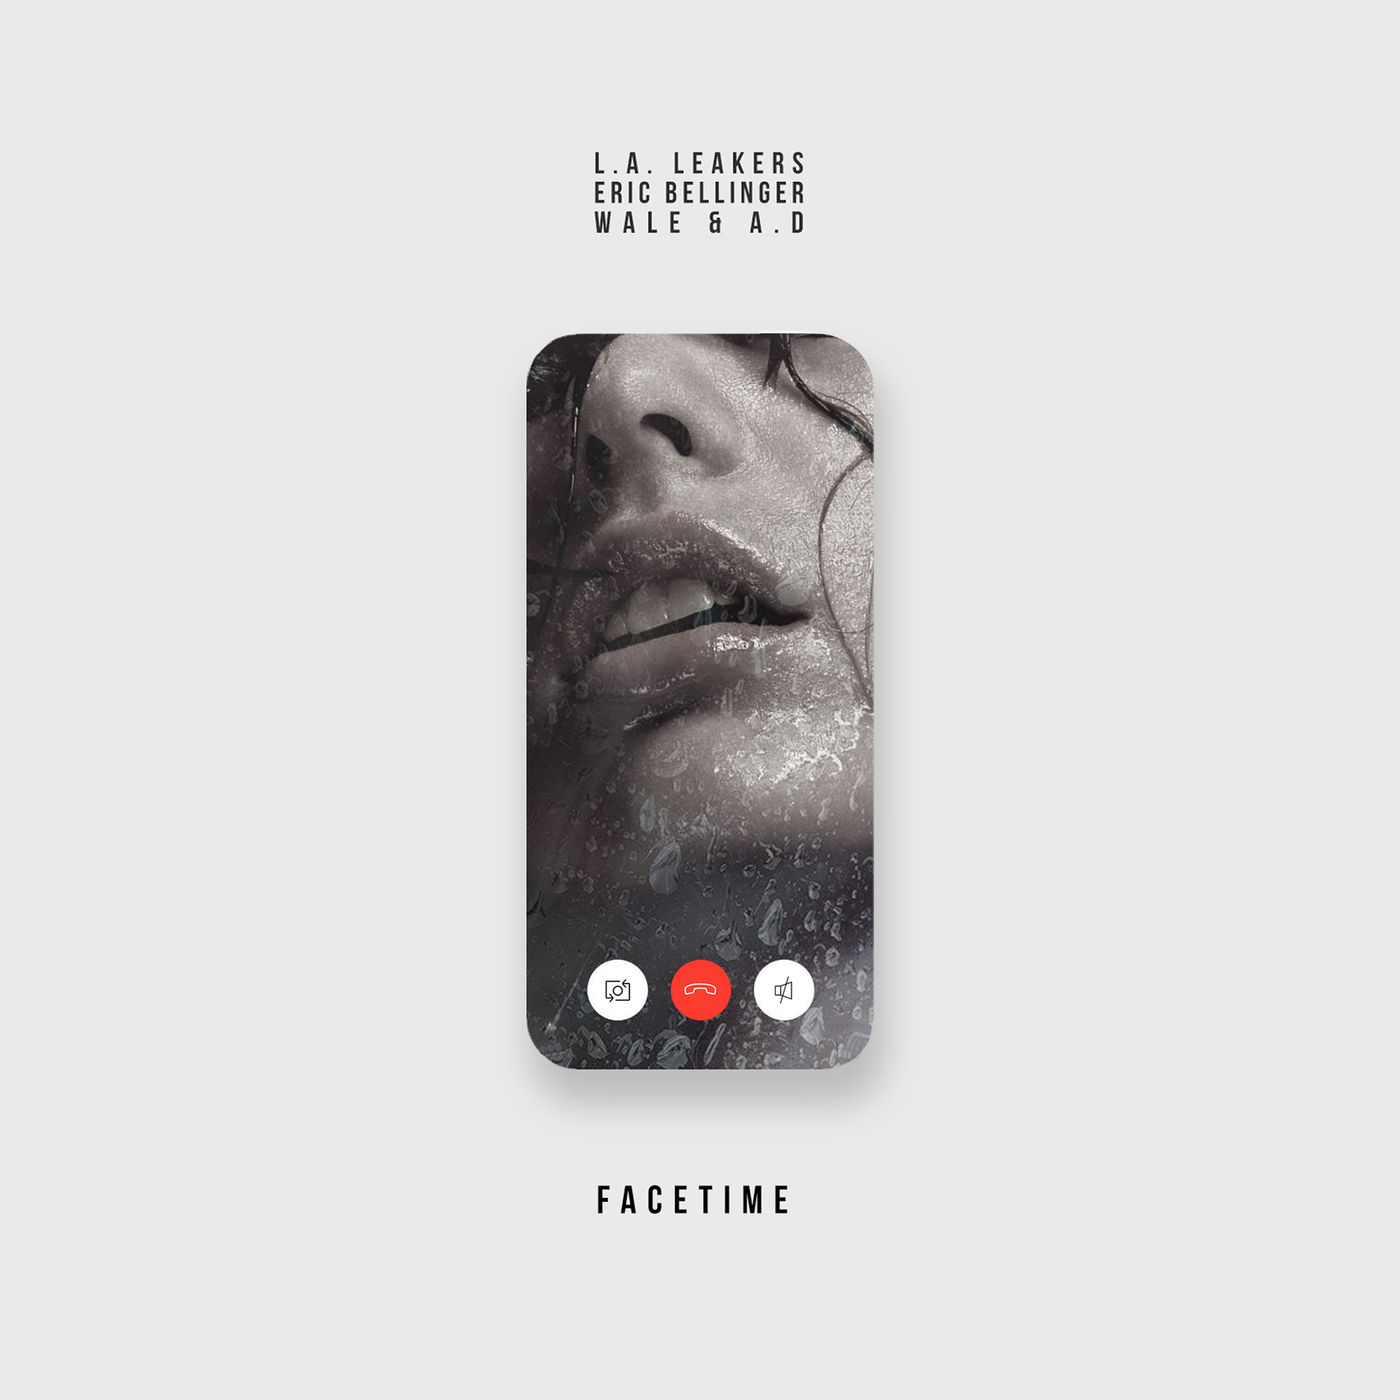 Check Out Our New Single “Facetime” Feat. Eric Bellinger, Wale & AD [LISTEN]